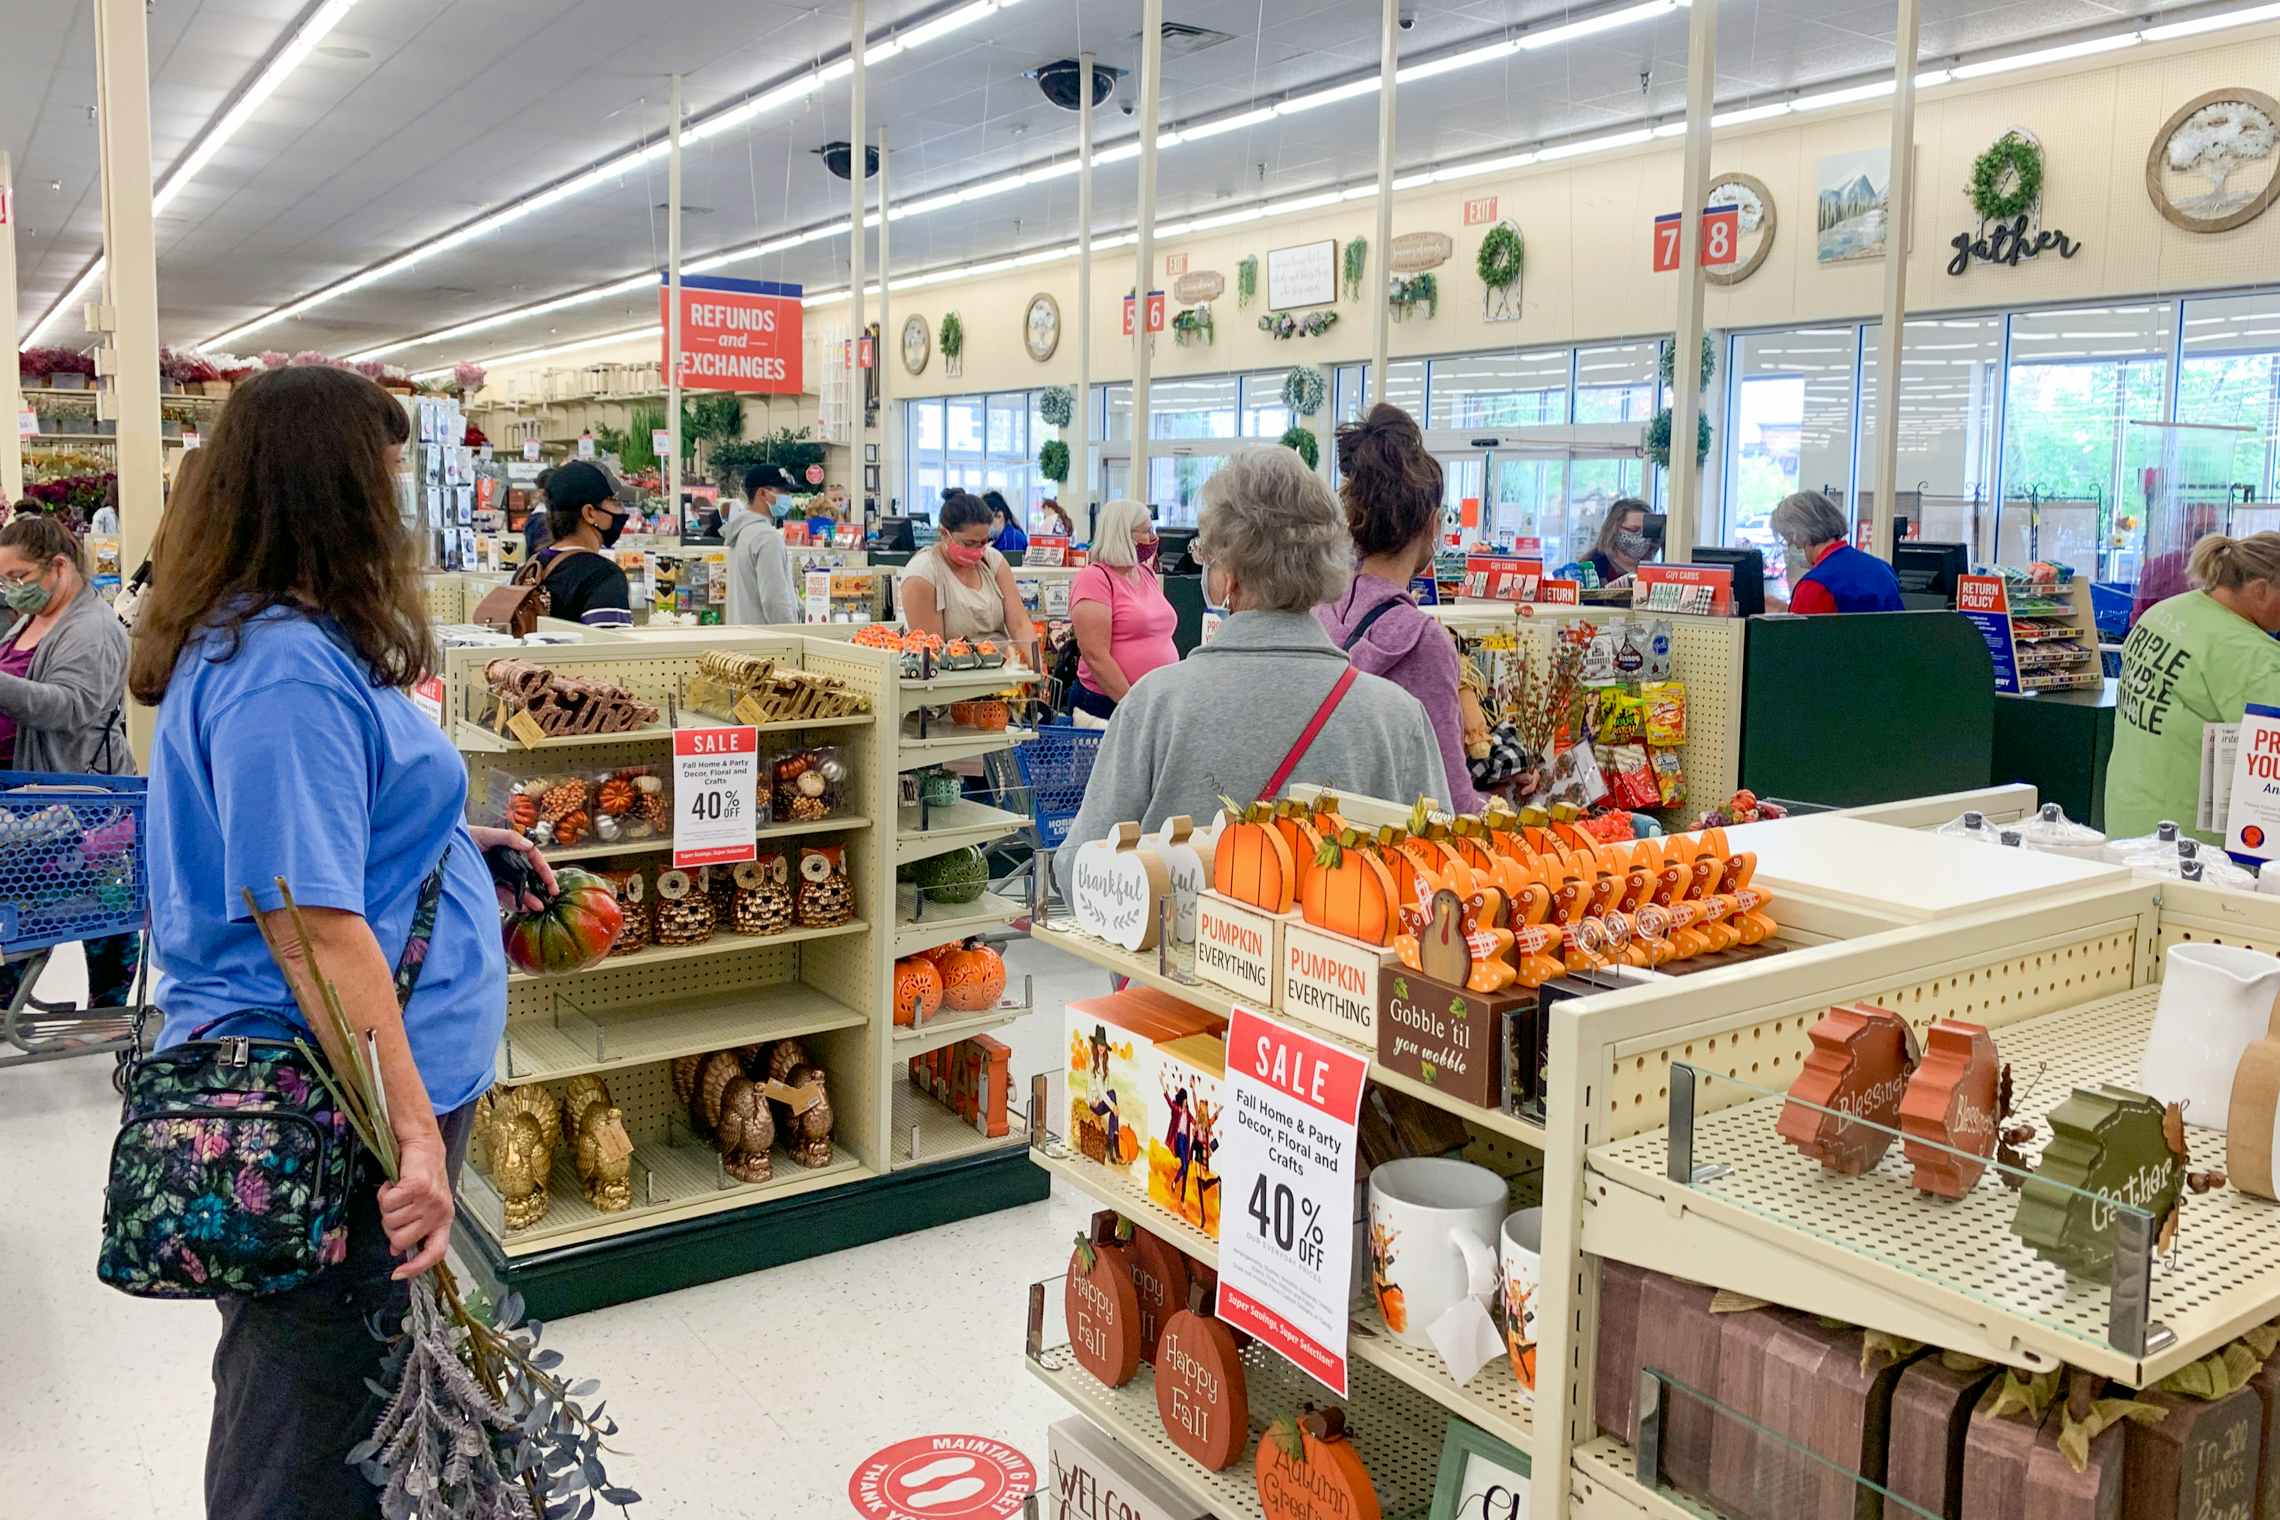 Customers wearing face masks, waiting in line at checkout, inside Hobby Lobby.